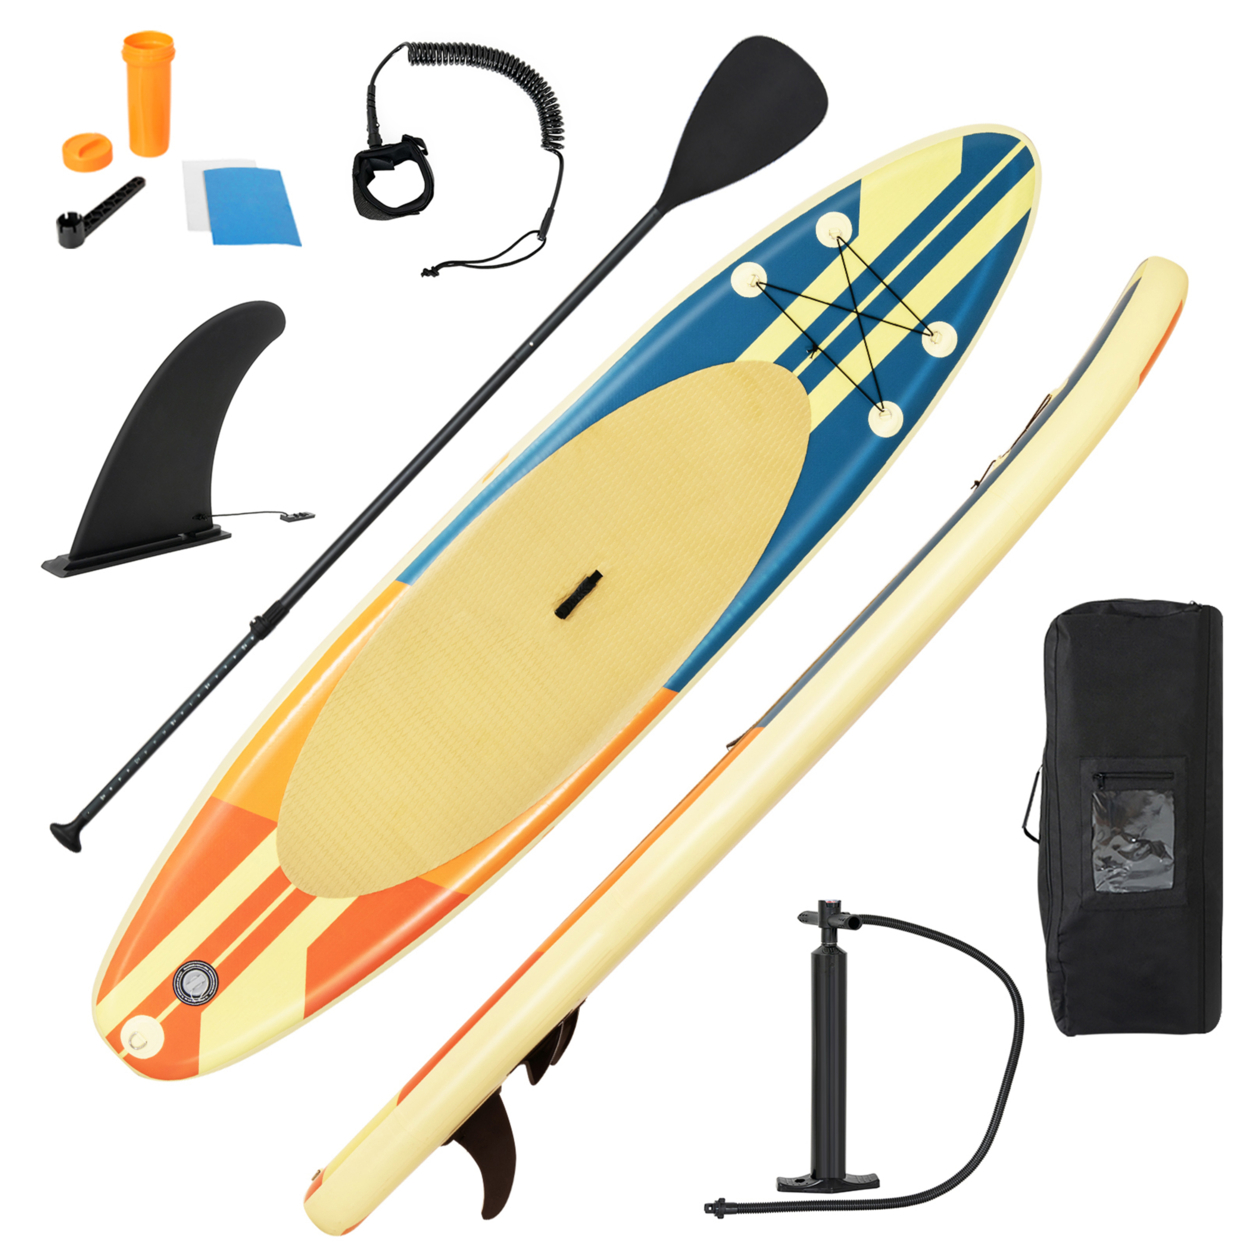 11ft Inflatable Stand-Up Paddle Board Non-Slip Deck Surfboard W/ Hand Pump